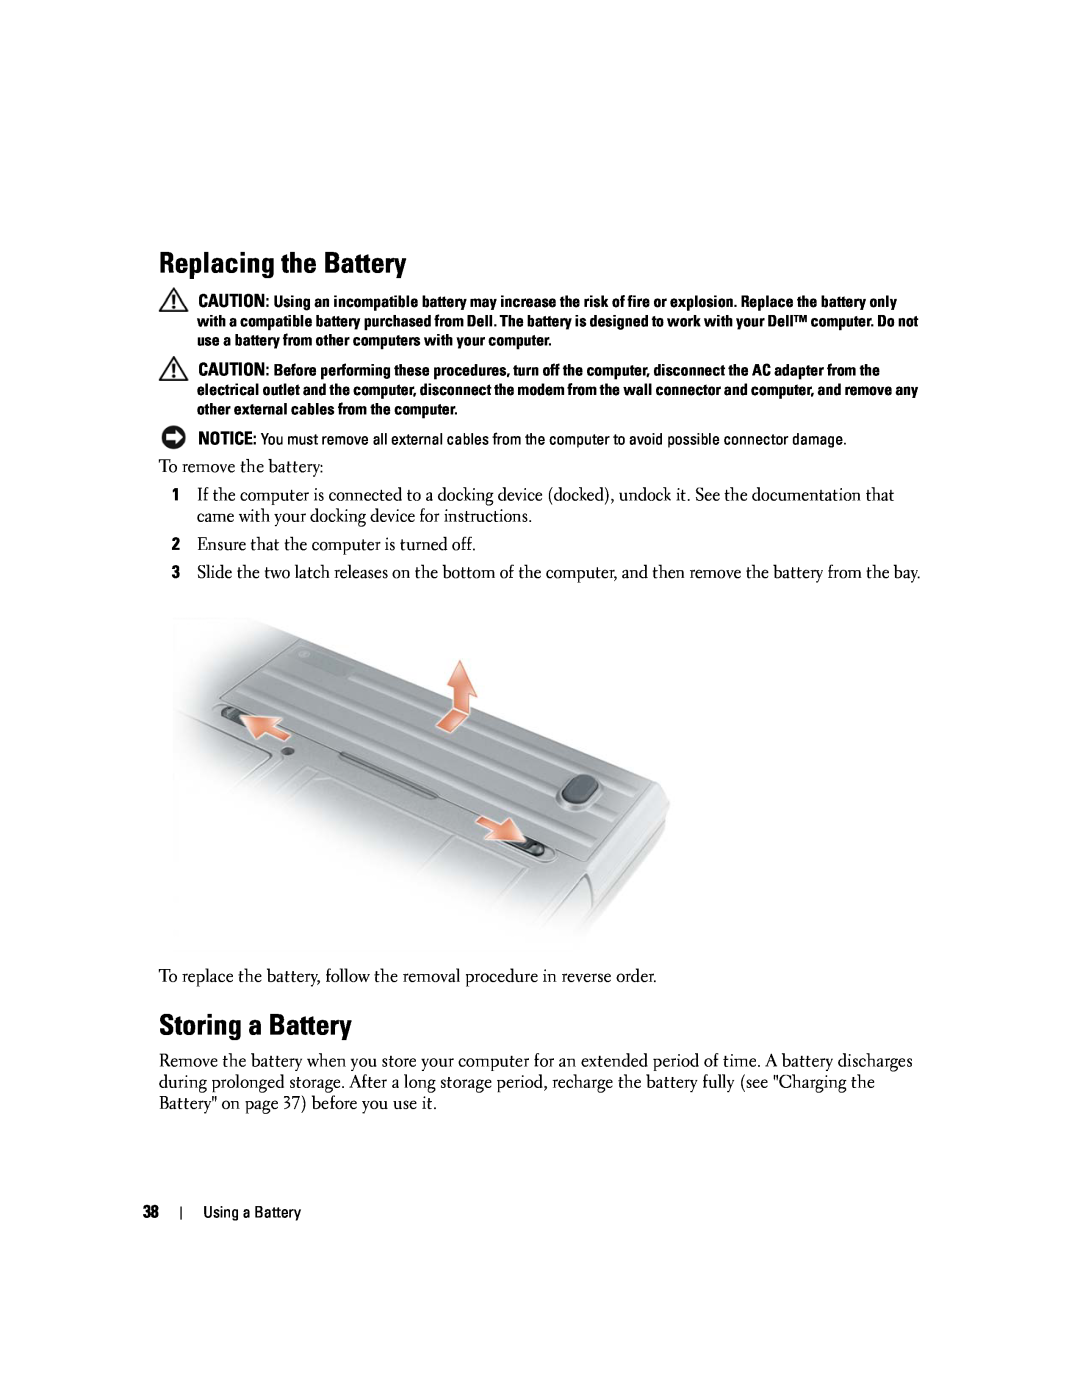 Dell PP24L manual Replacing the Battery, Storing a Battery 